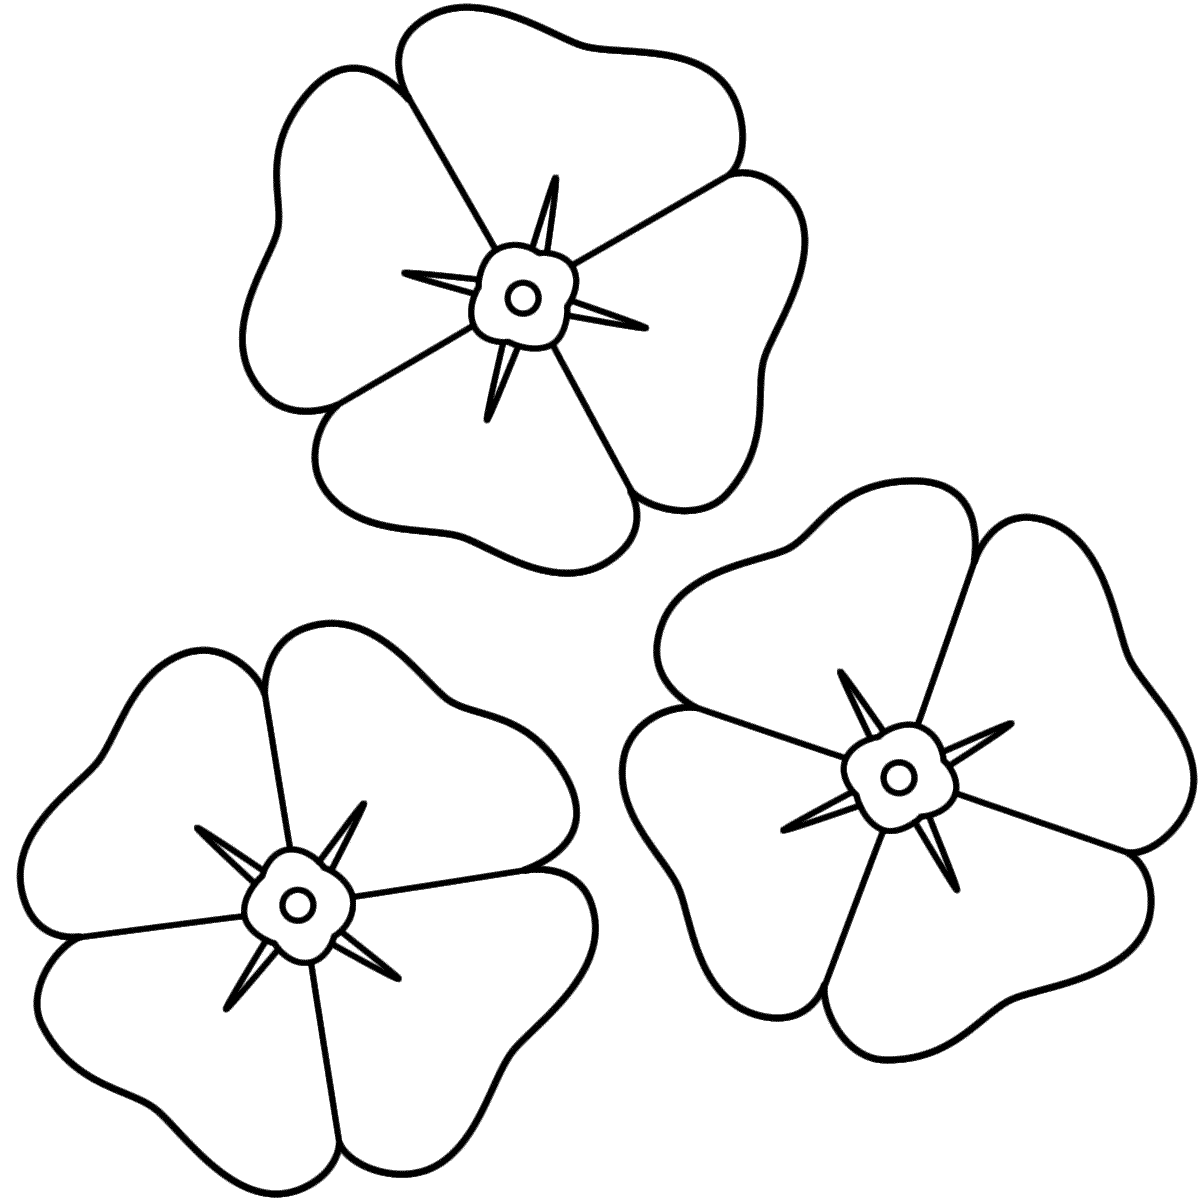 Poppy coloring #19, Download drawings